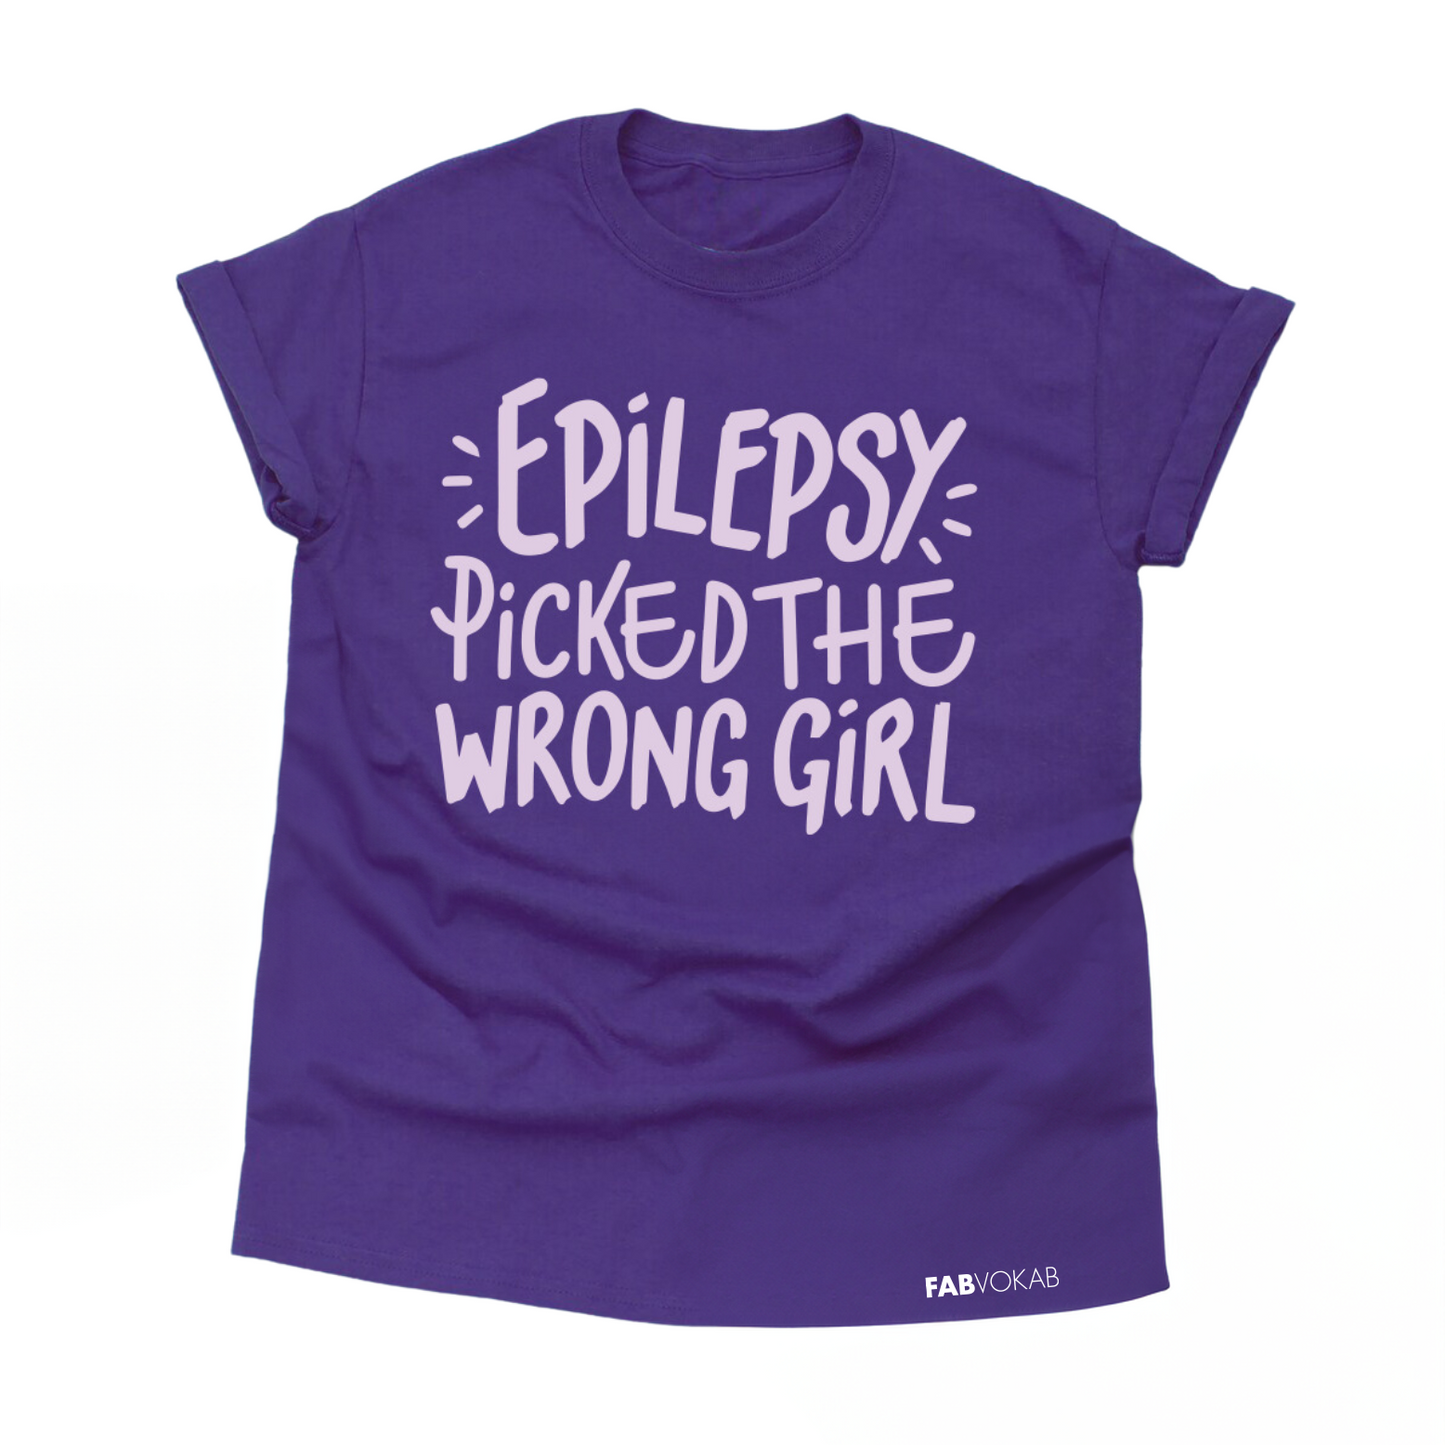 "Epilepsy picked the wrong girl" Purple Short Sleeve T-shirt